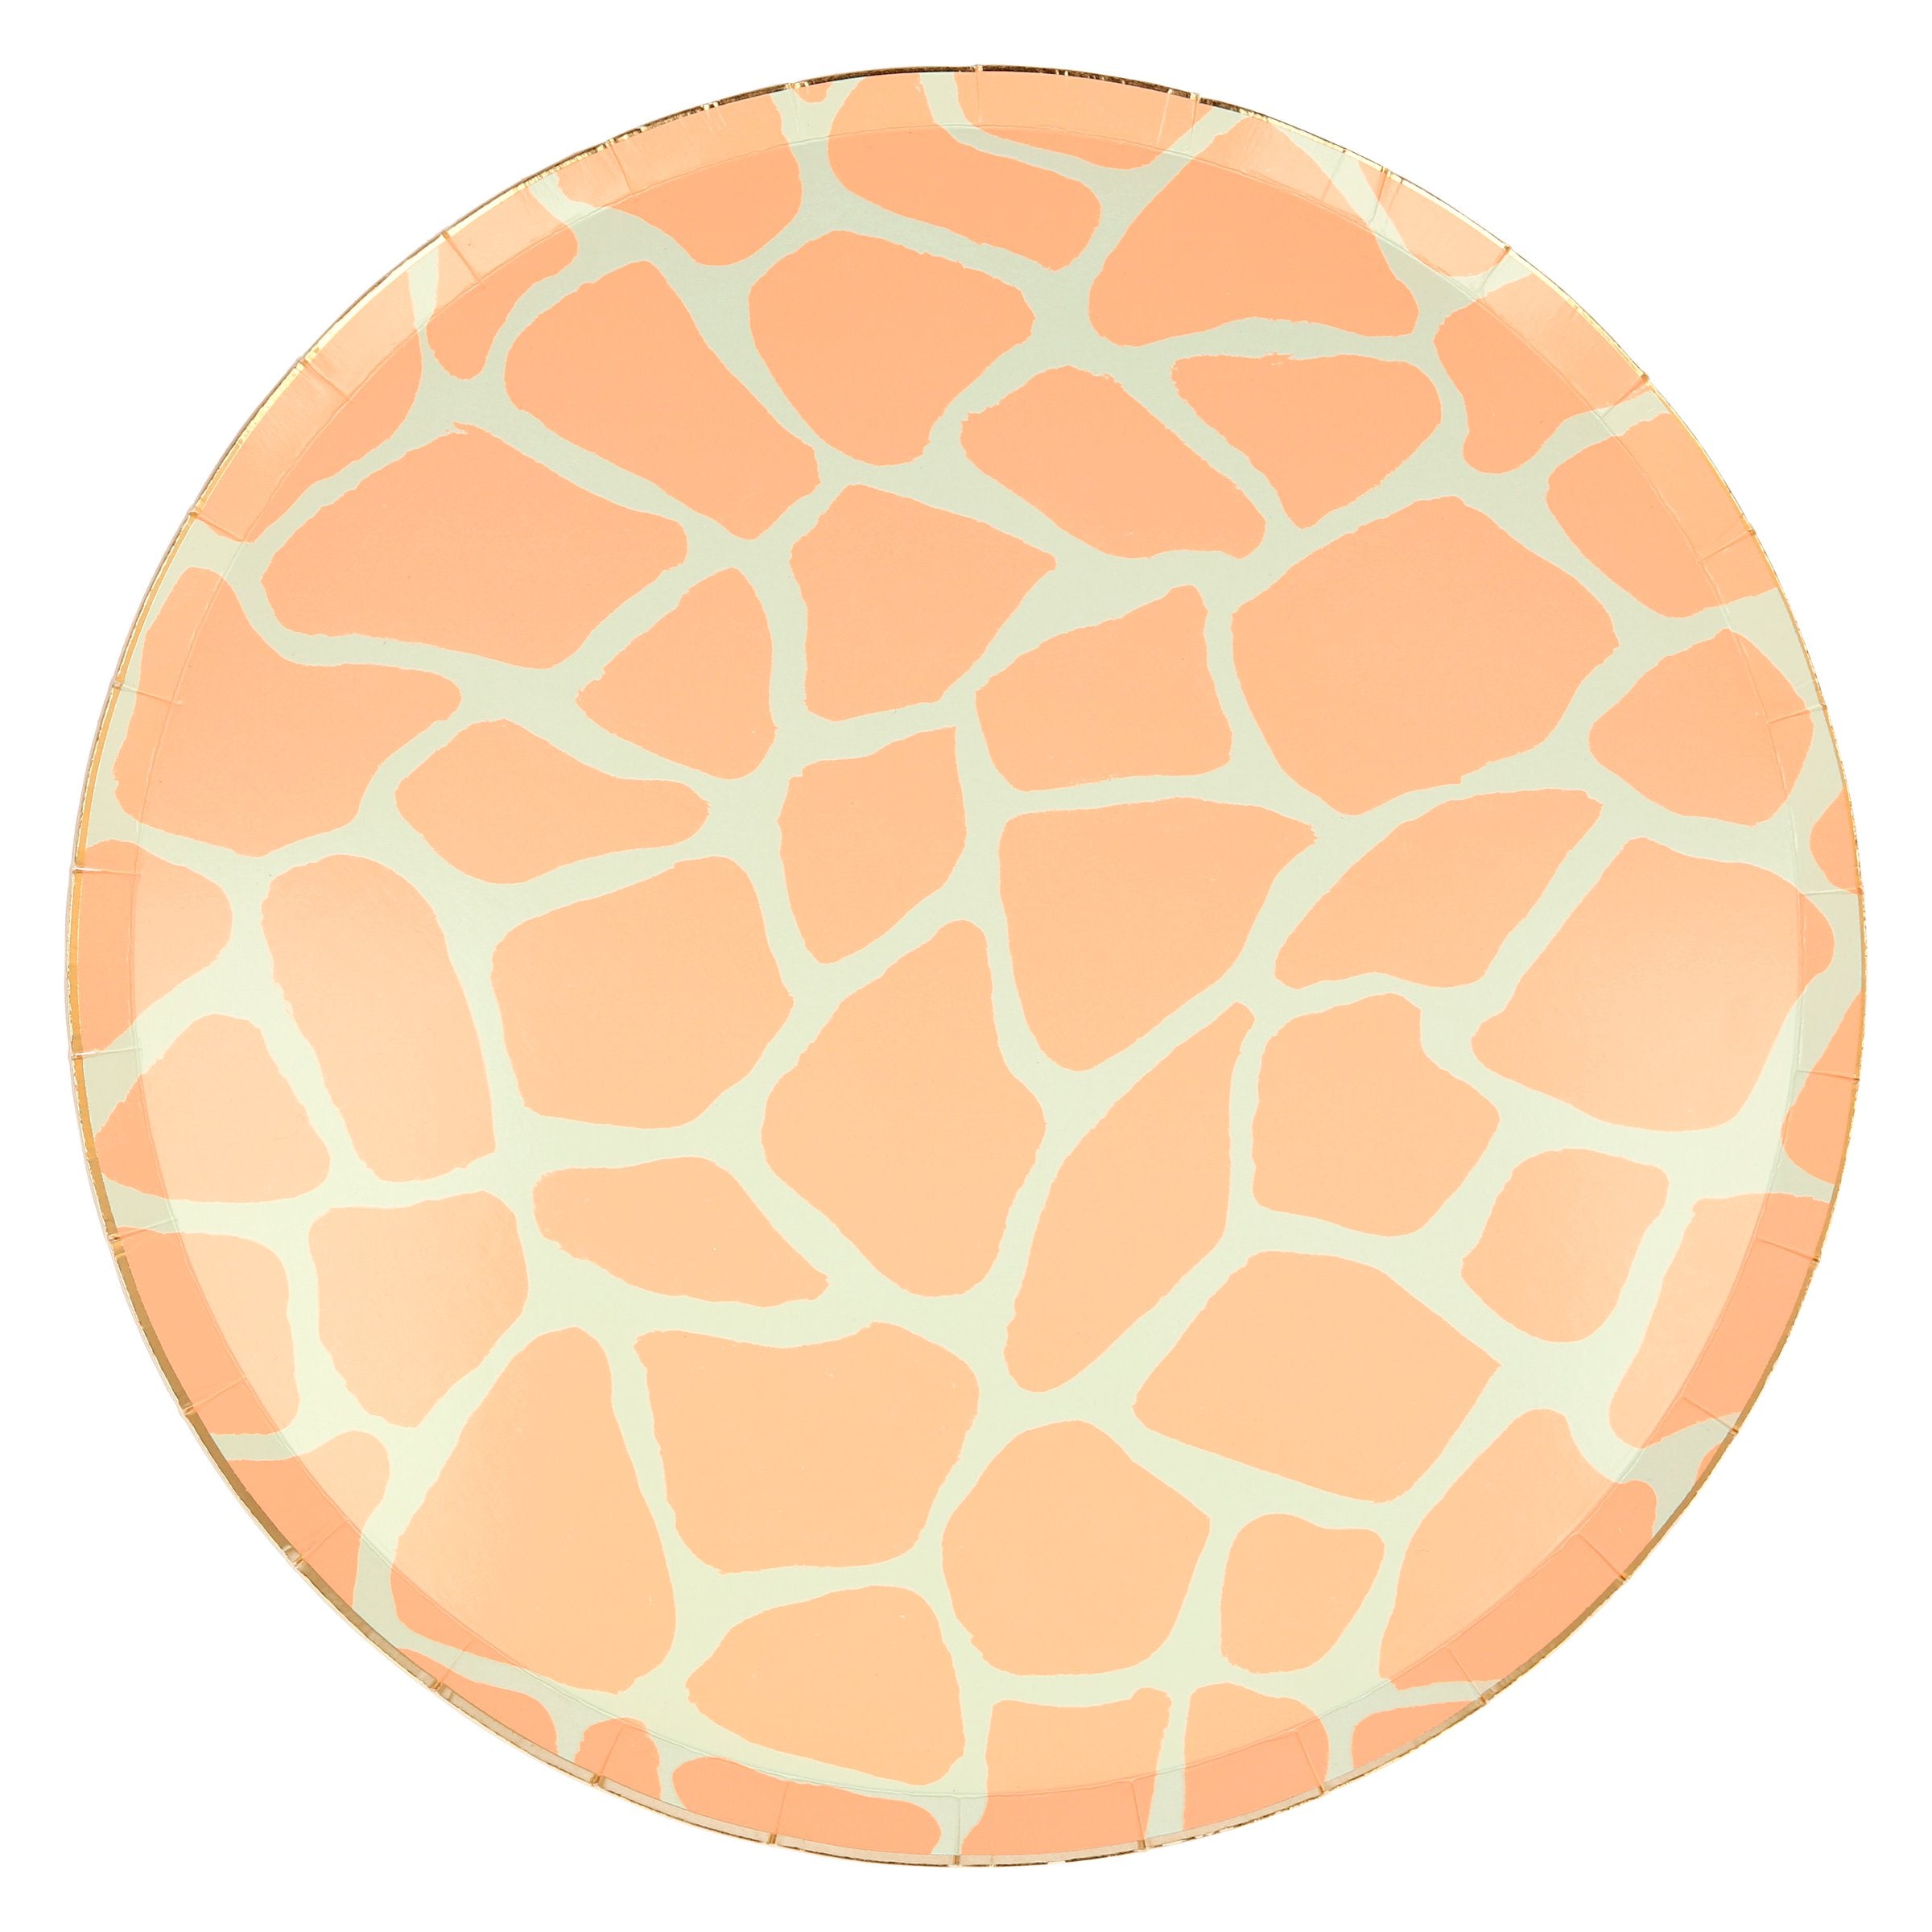 Our animal print dinner plates are fabulous paper plates for a safari party.